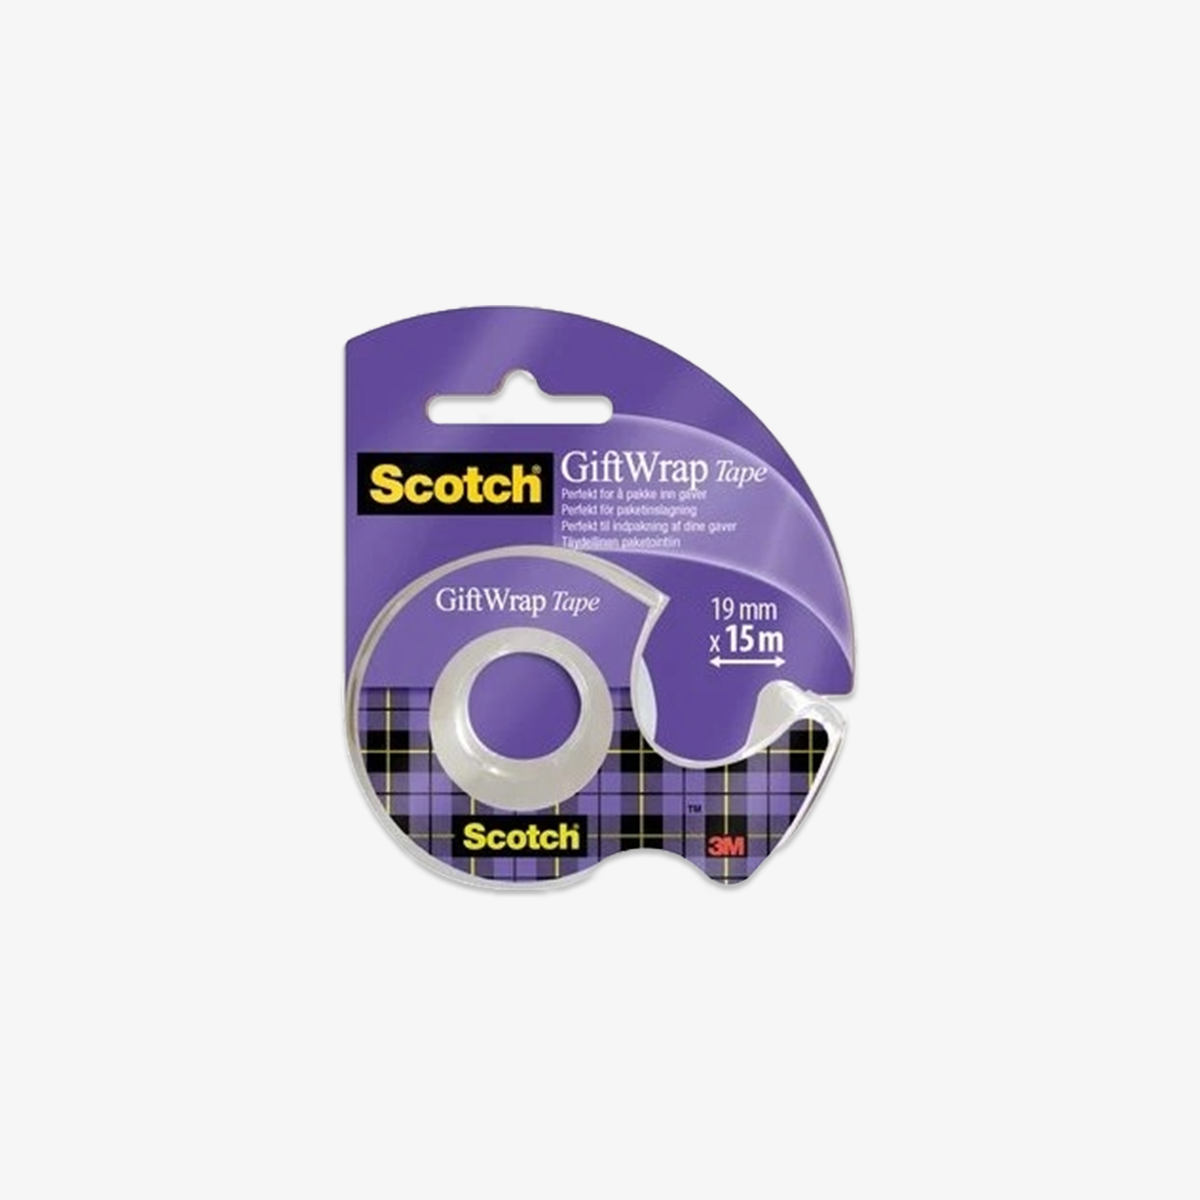 Scotch Gift Wrap Tape, 1 Roll on Handheld Dispenser 19 mm x 15 m + 2 Refill  Rolls 19 mm x 25 m – for Christmas Gift Wrapping, for Christmas Presents